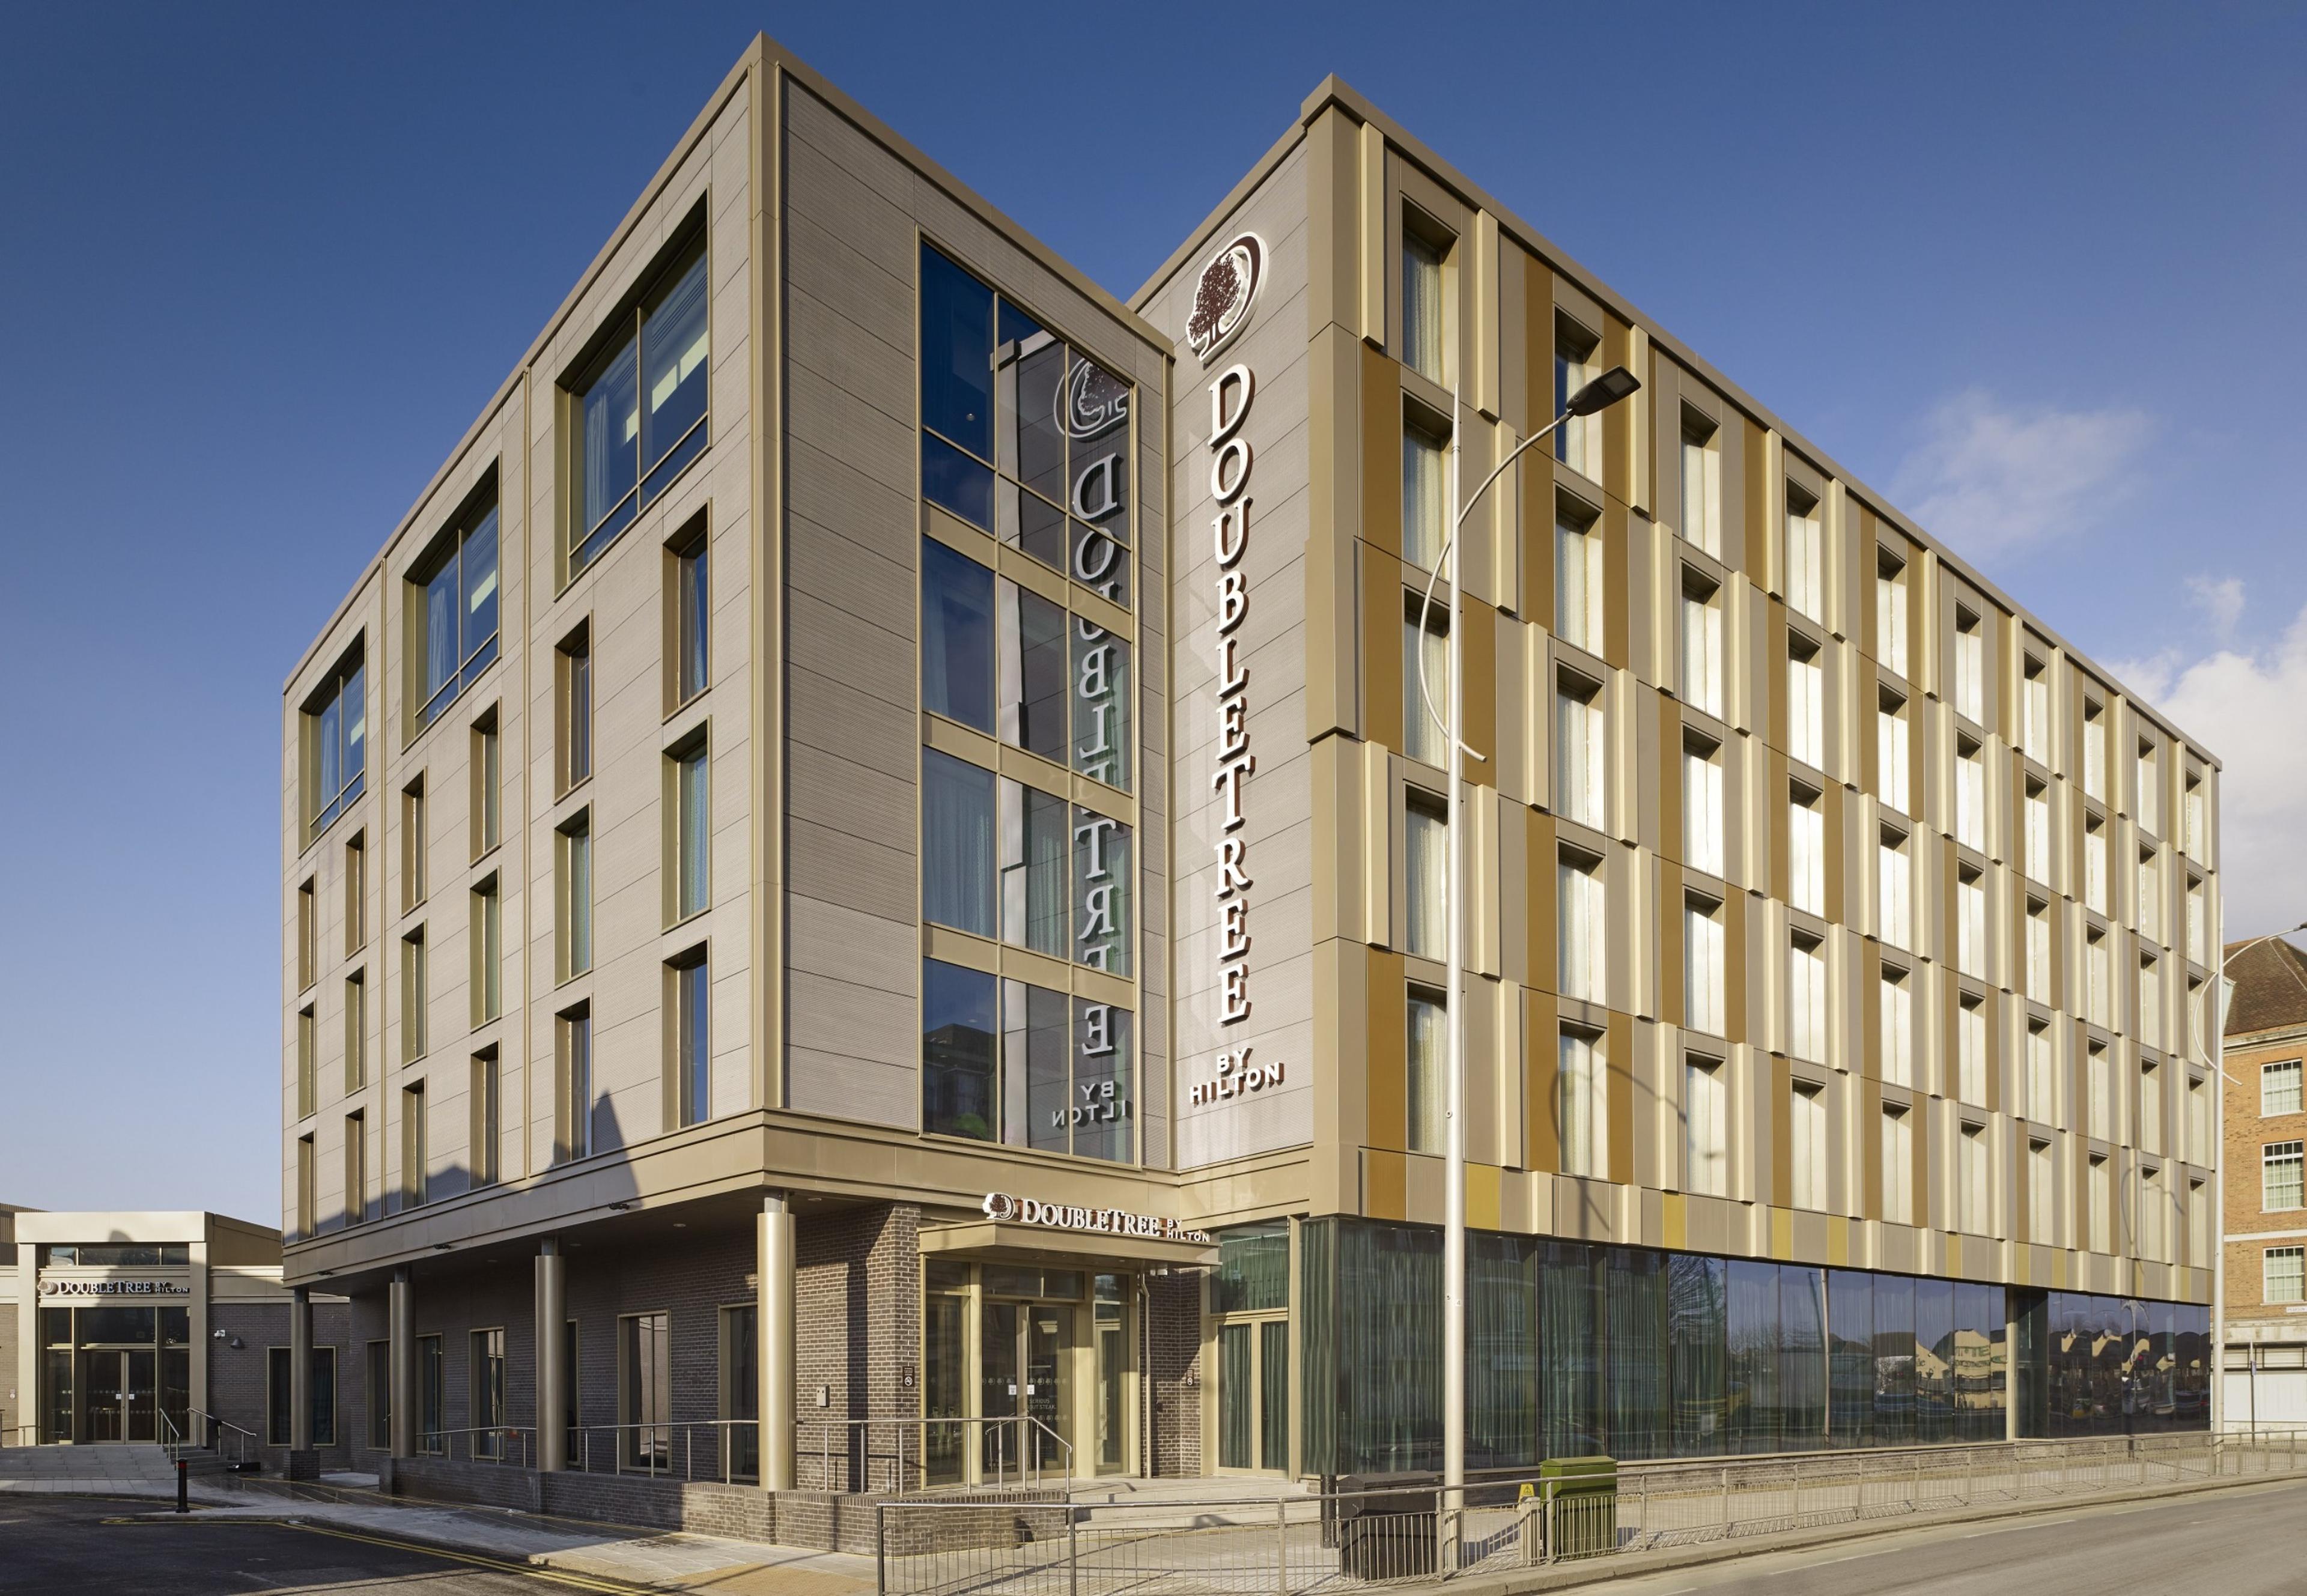 DoubleTree by Hilton Hull